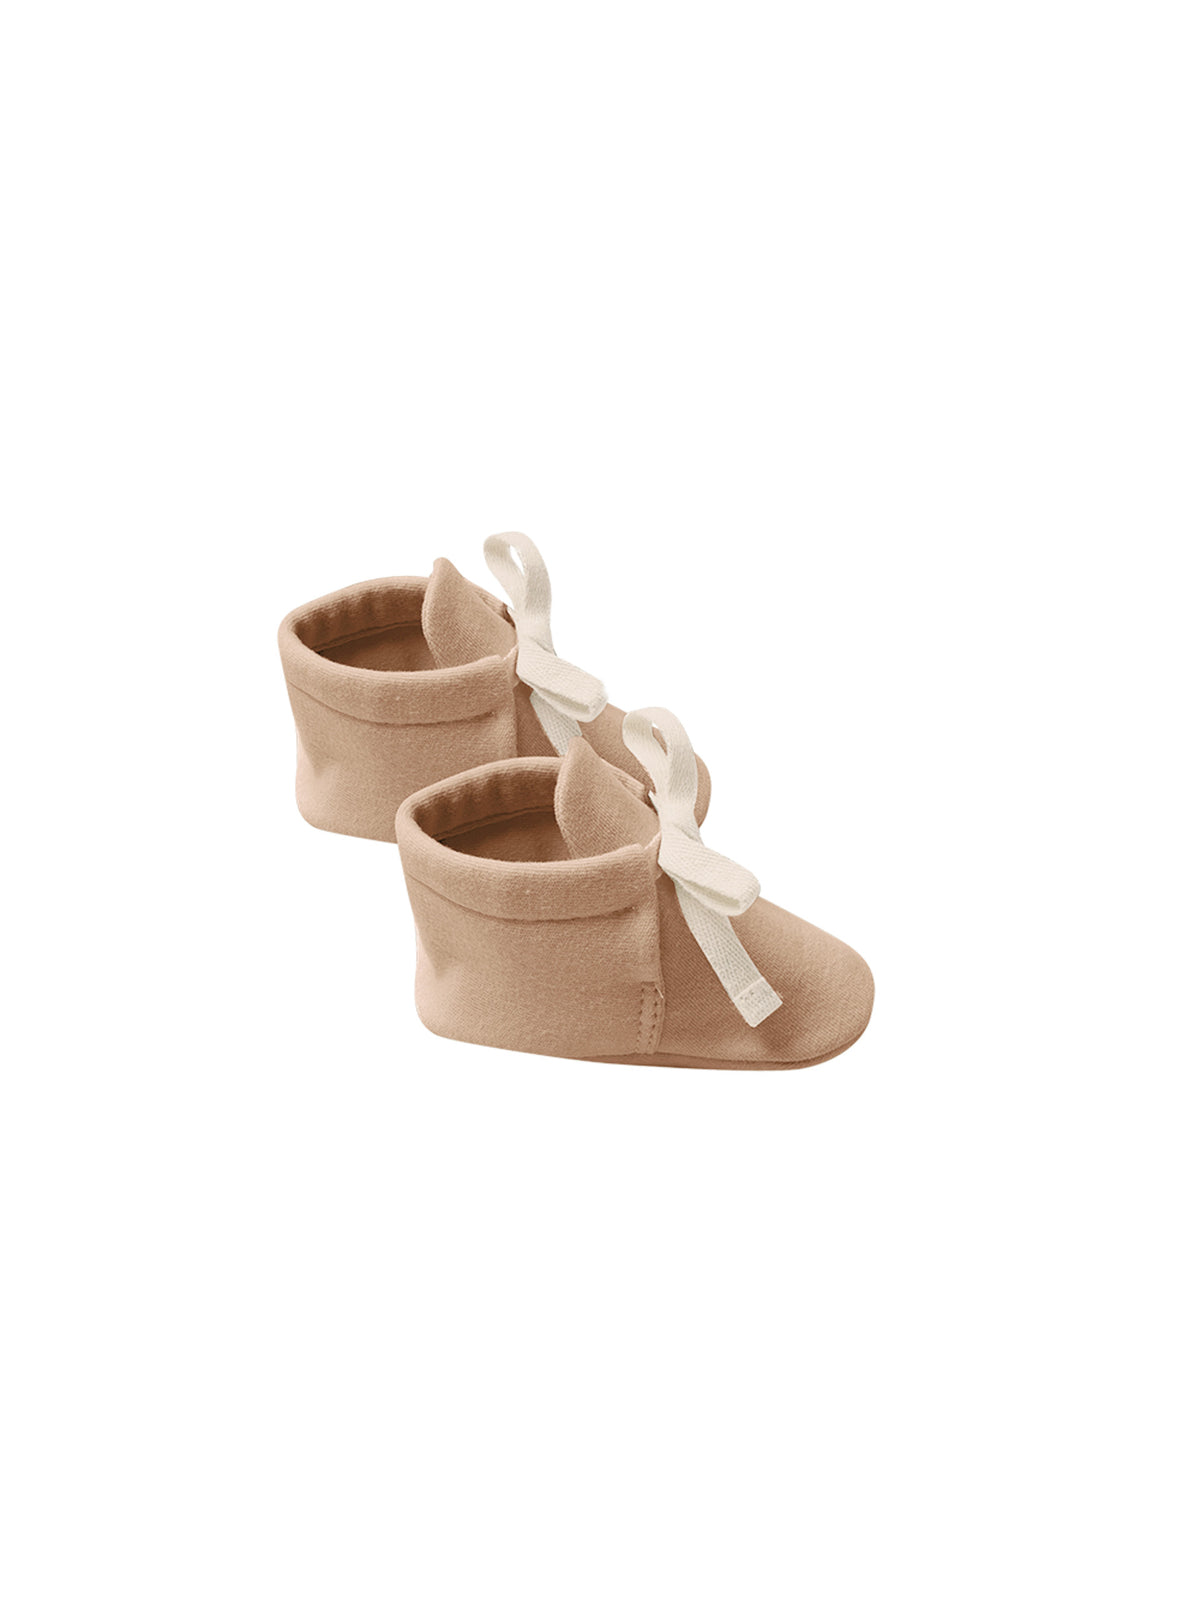 Baby Booties - Apricot - Child Boutique